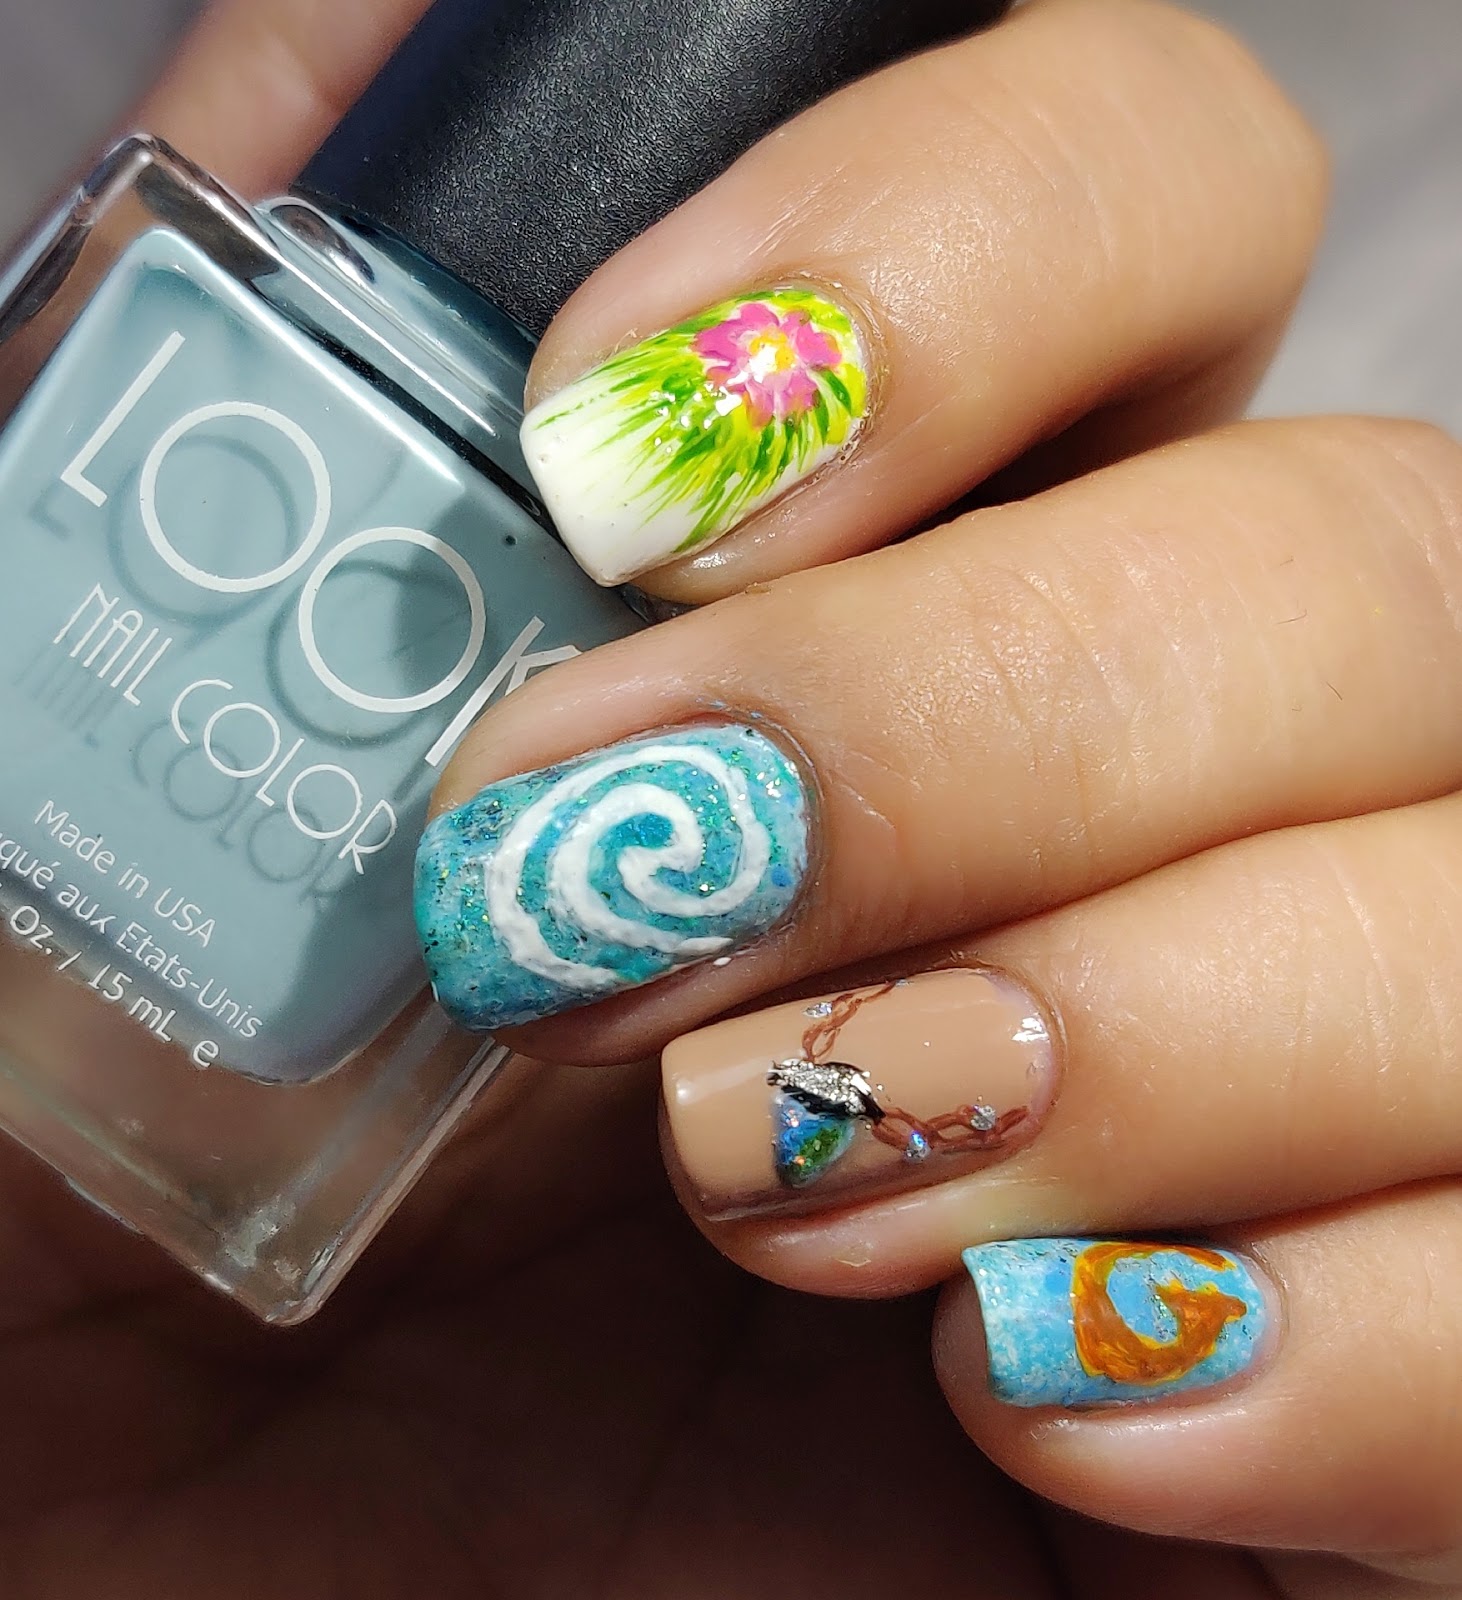 The 31 Day Nail Art Challenge: Day Twenty-Three: Inspired by a Movie